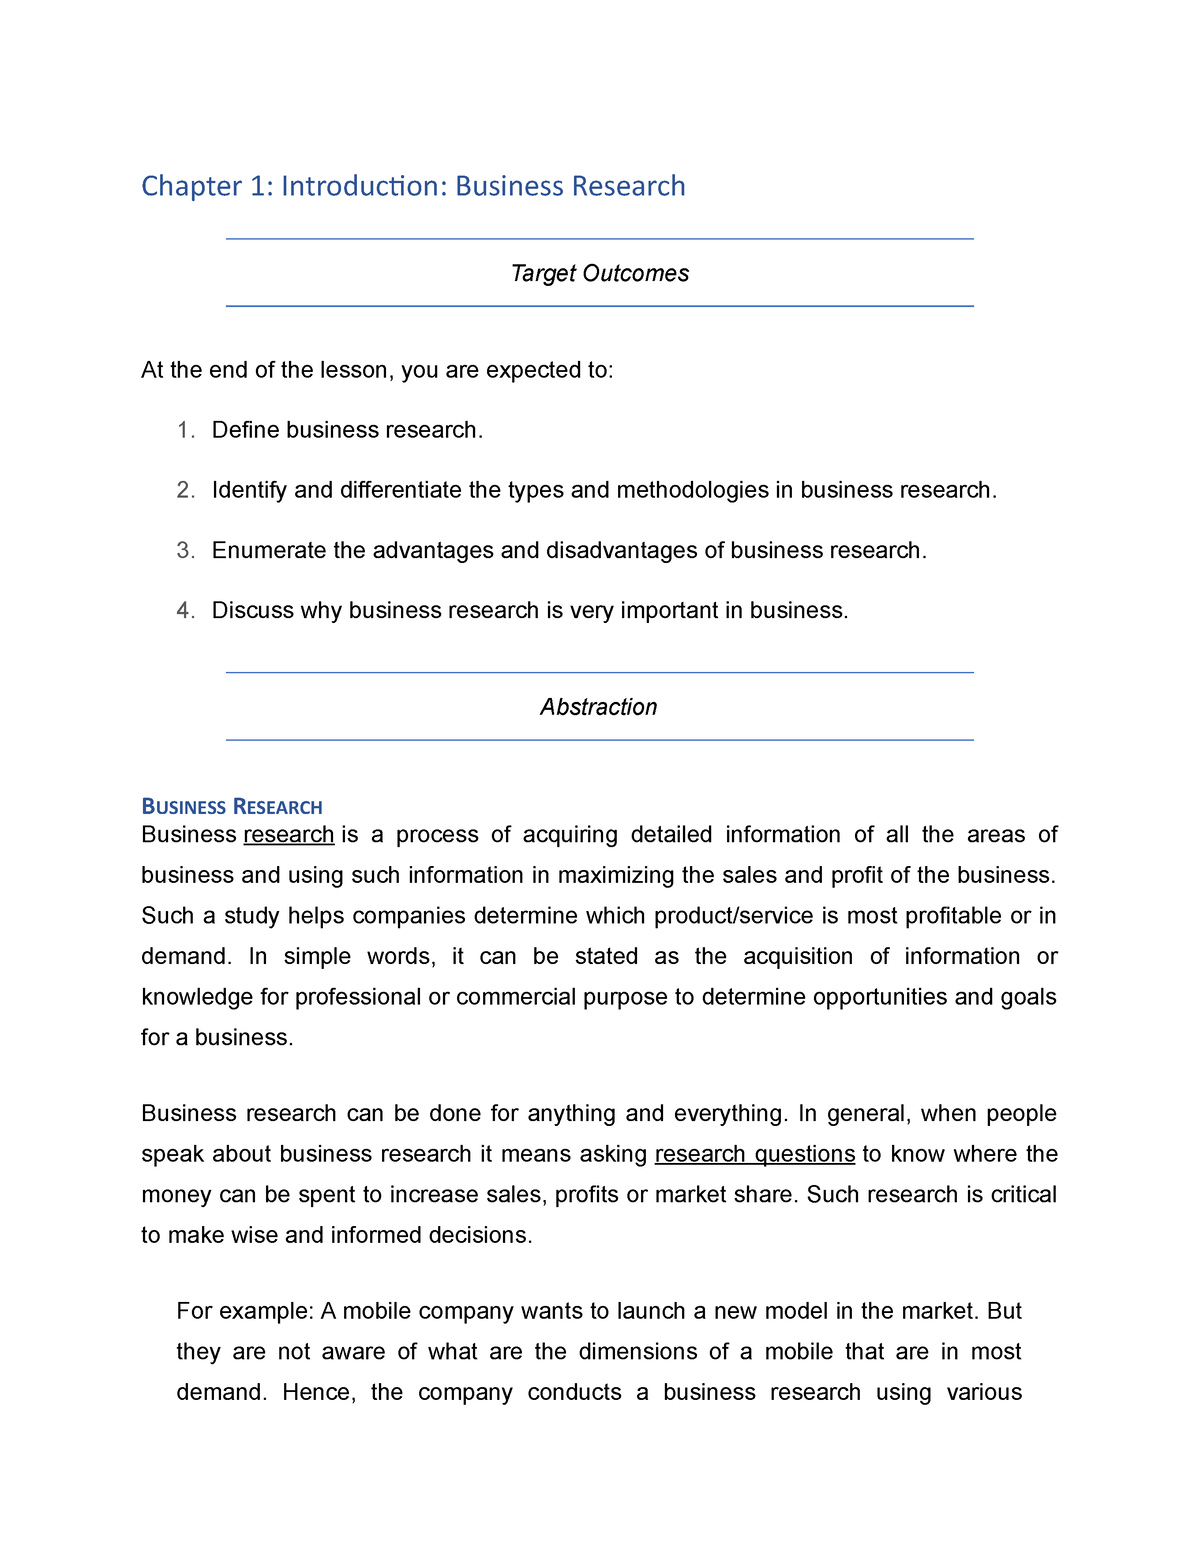 business research chapter 1 example